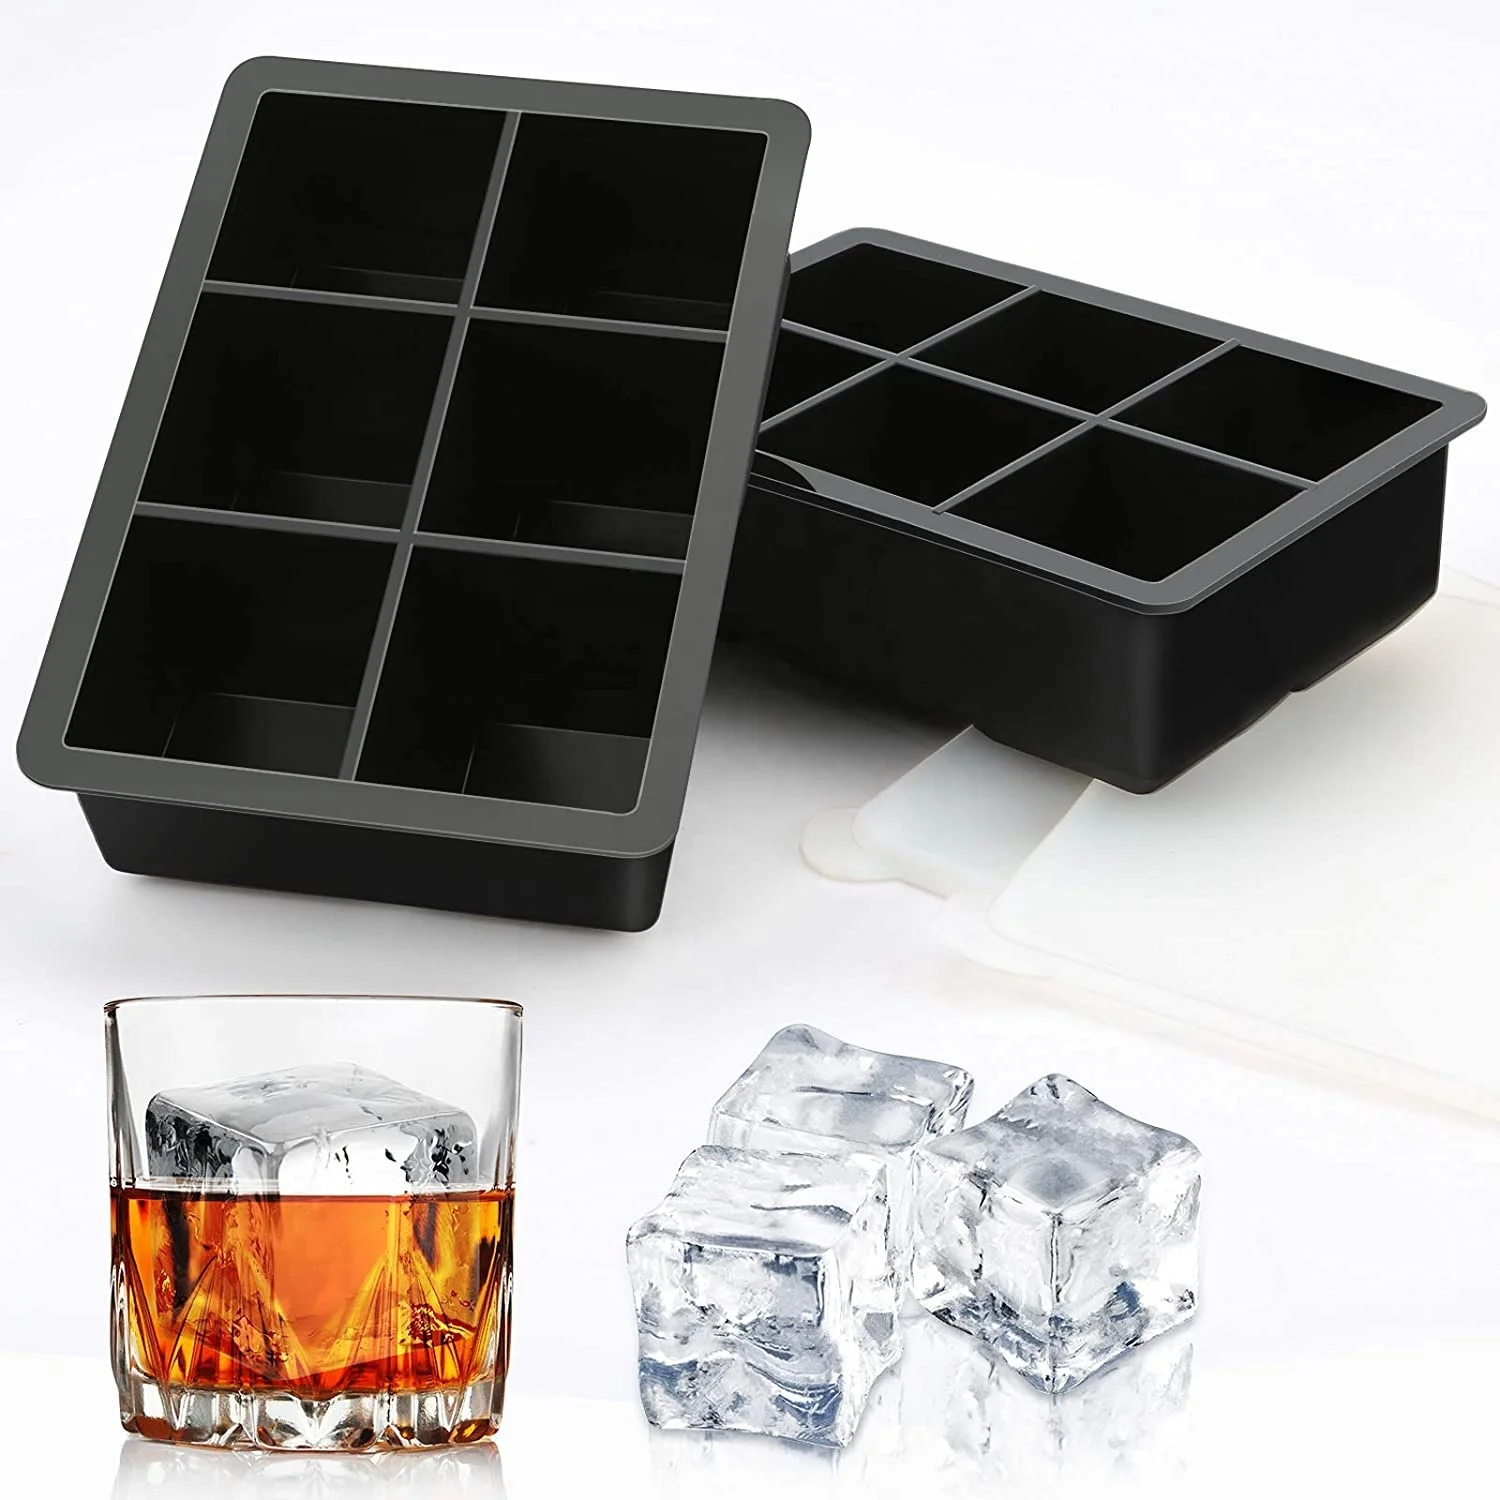 

Amazon Hot Sell Silicone Ice Cube Tray - Large 4/6/8 Cavity Square Shape Silicone Ice Cube Mould